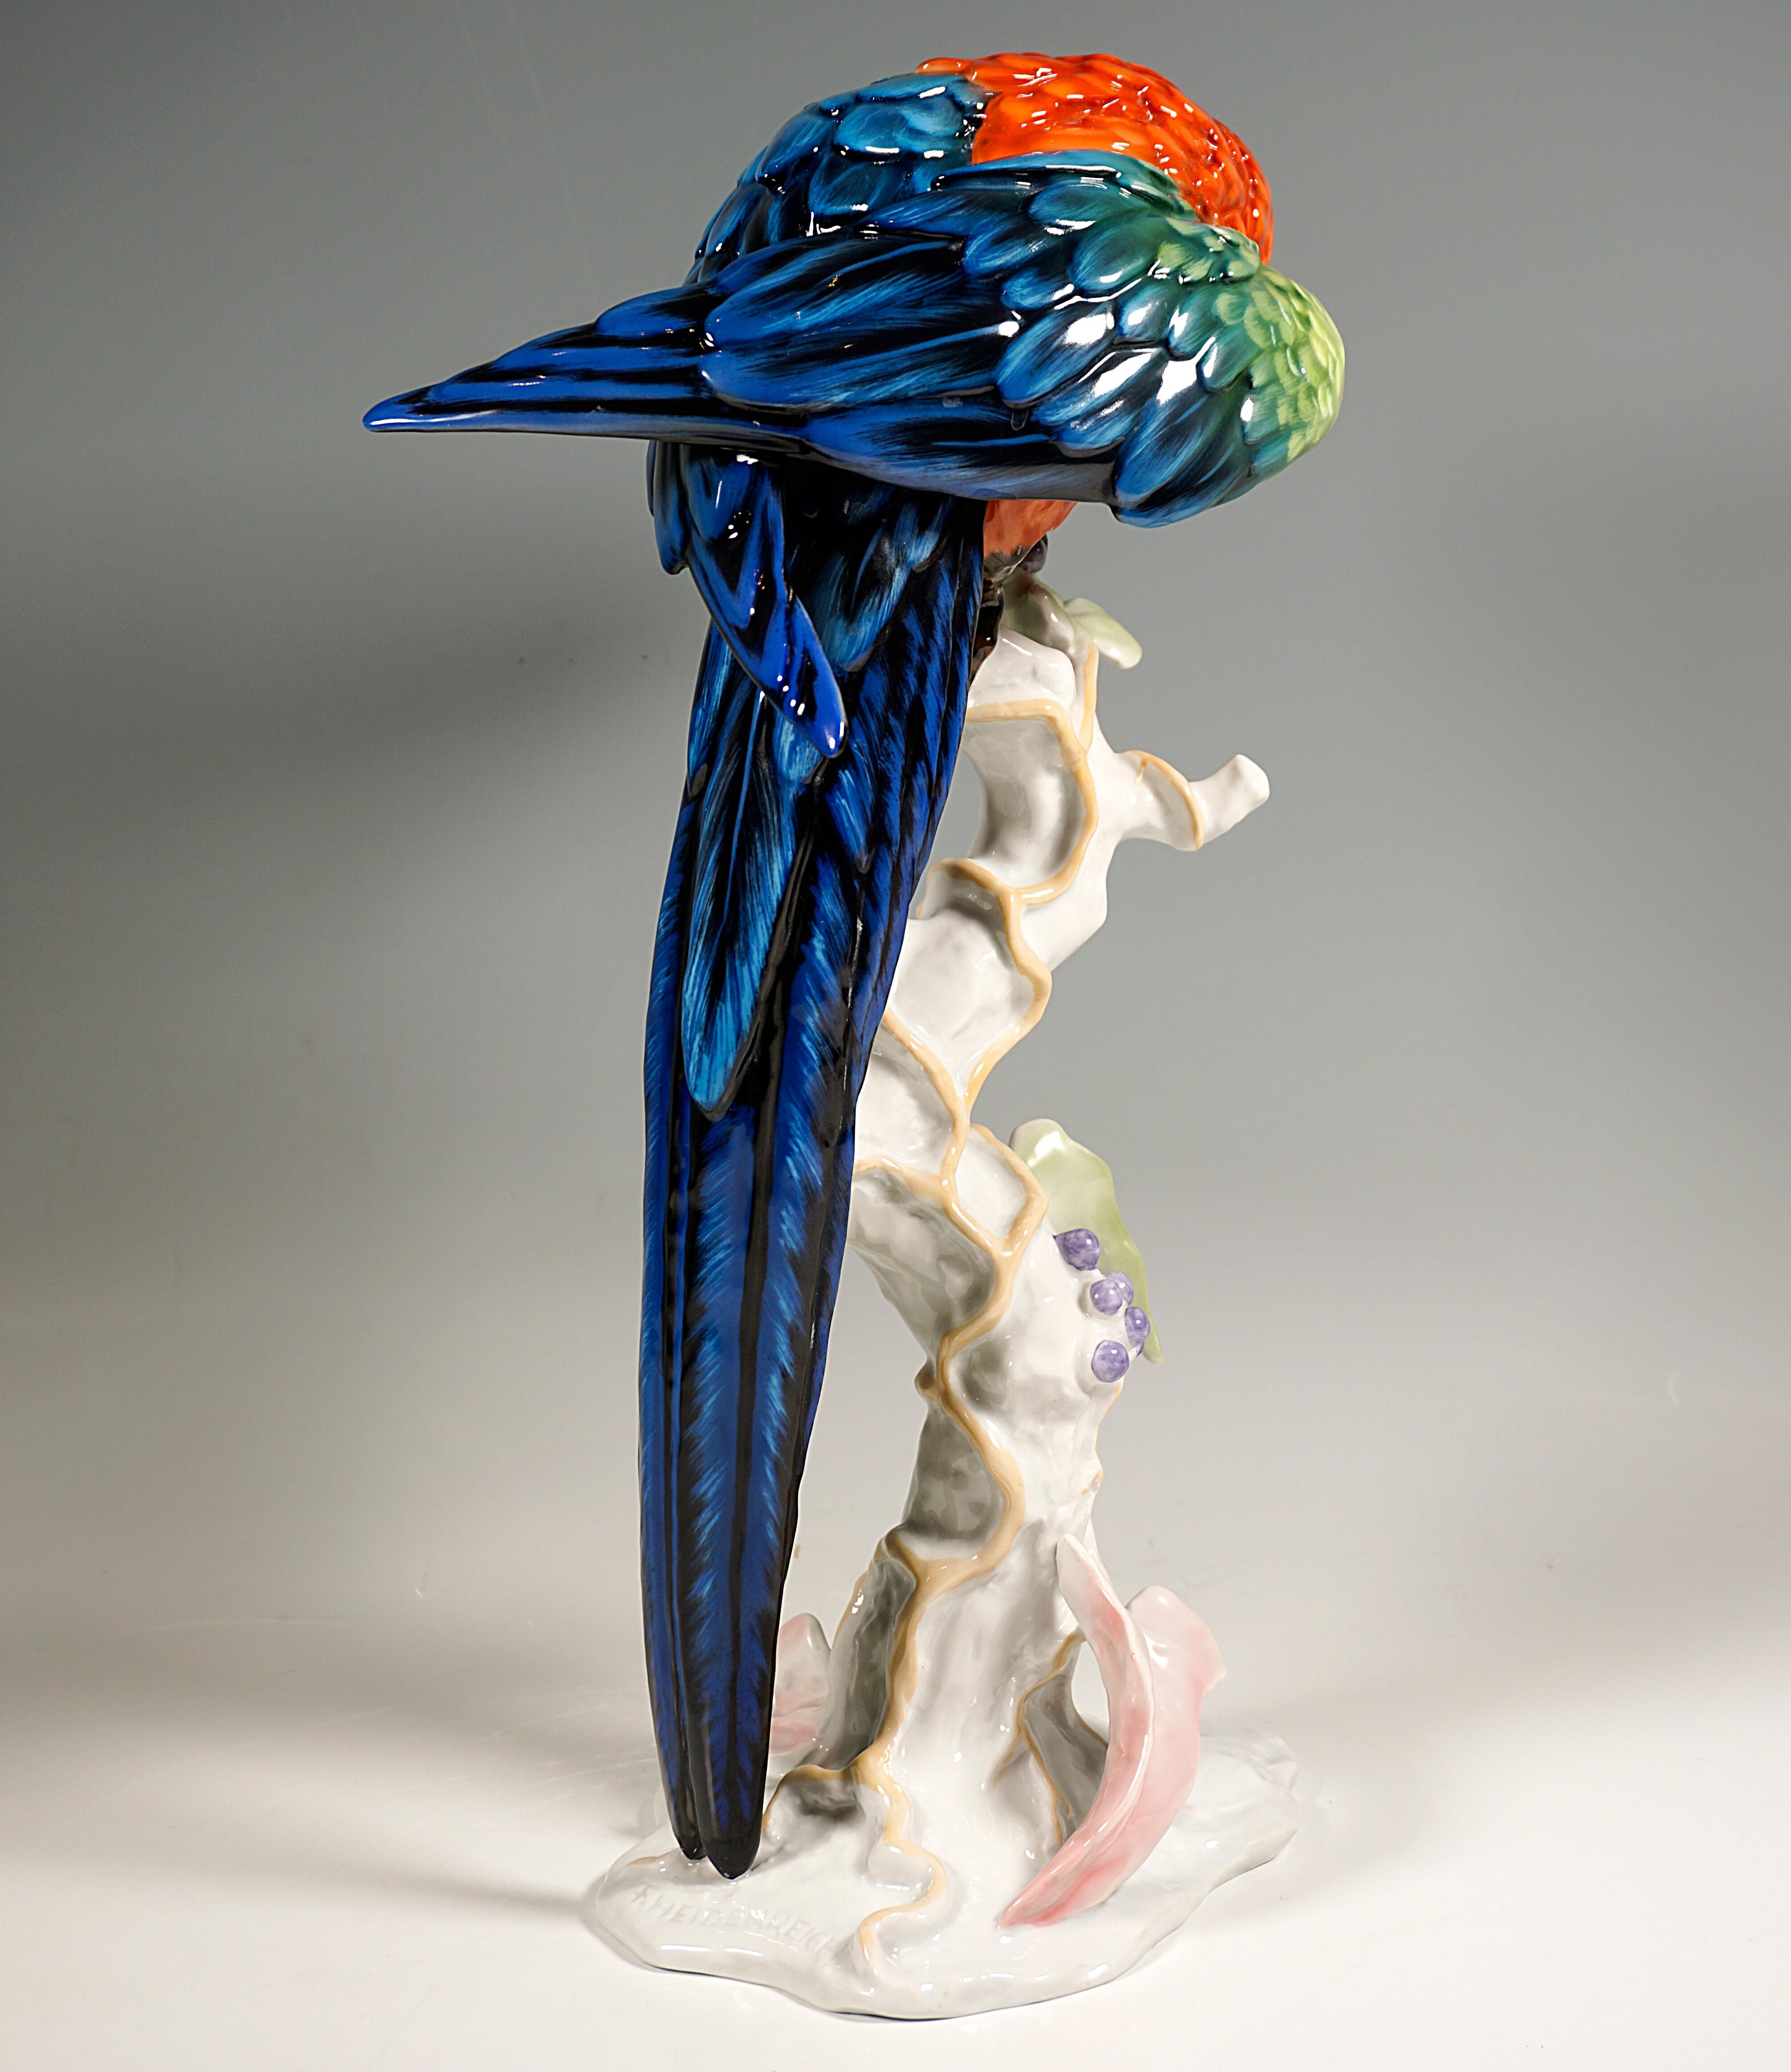 Hand-Painted Large Porcelain Animal Figure, Macaw on a Trunk, Rosenthal Germany, Mid-20th